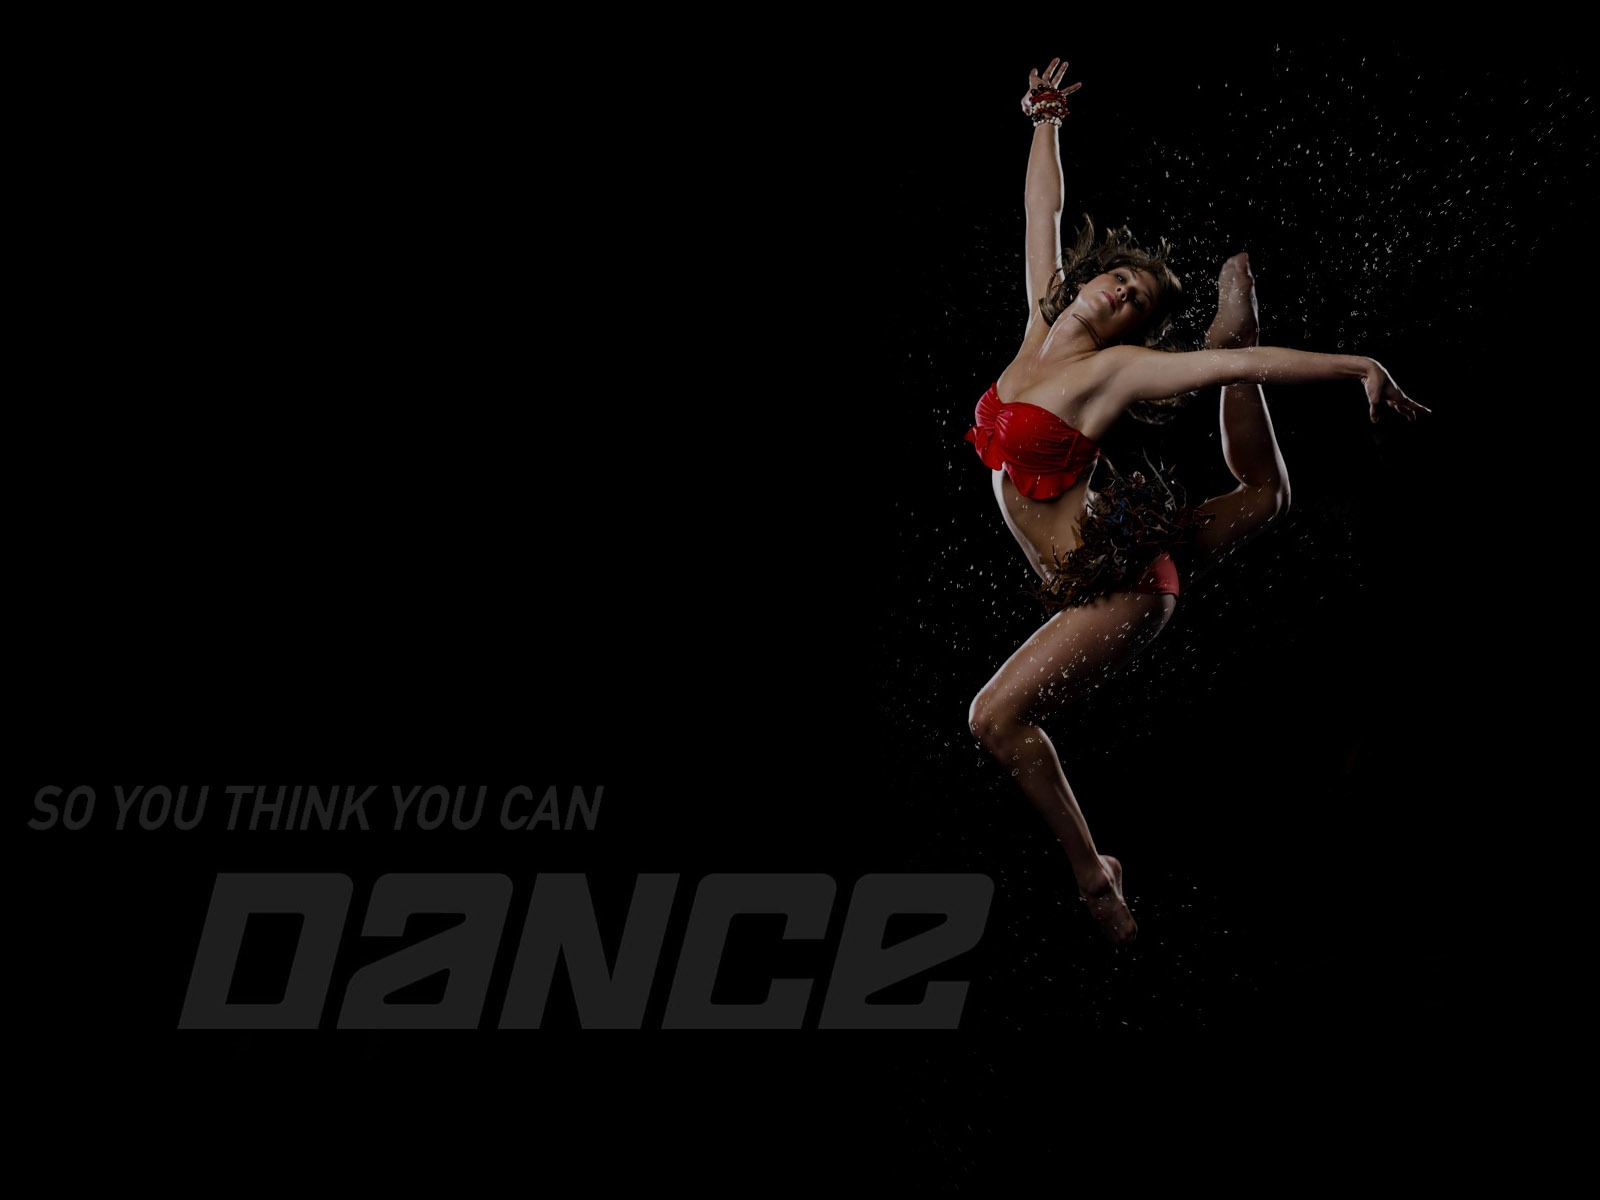 So You Think You Can Dance wallpaper (2) #13 - 1600x1200